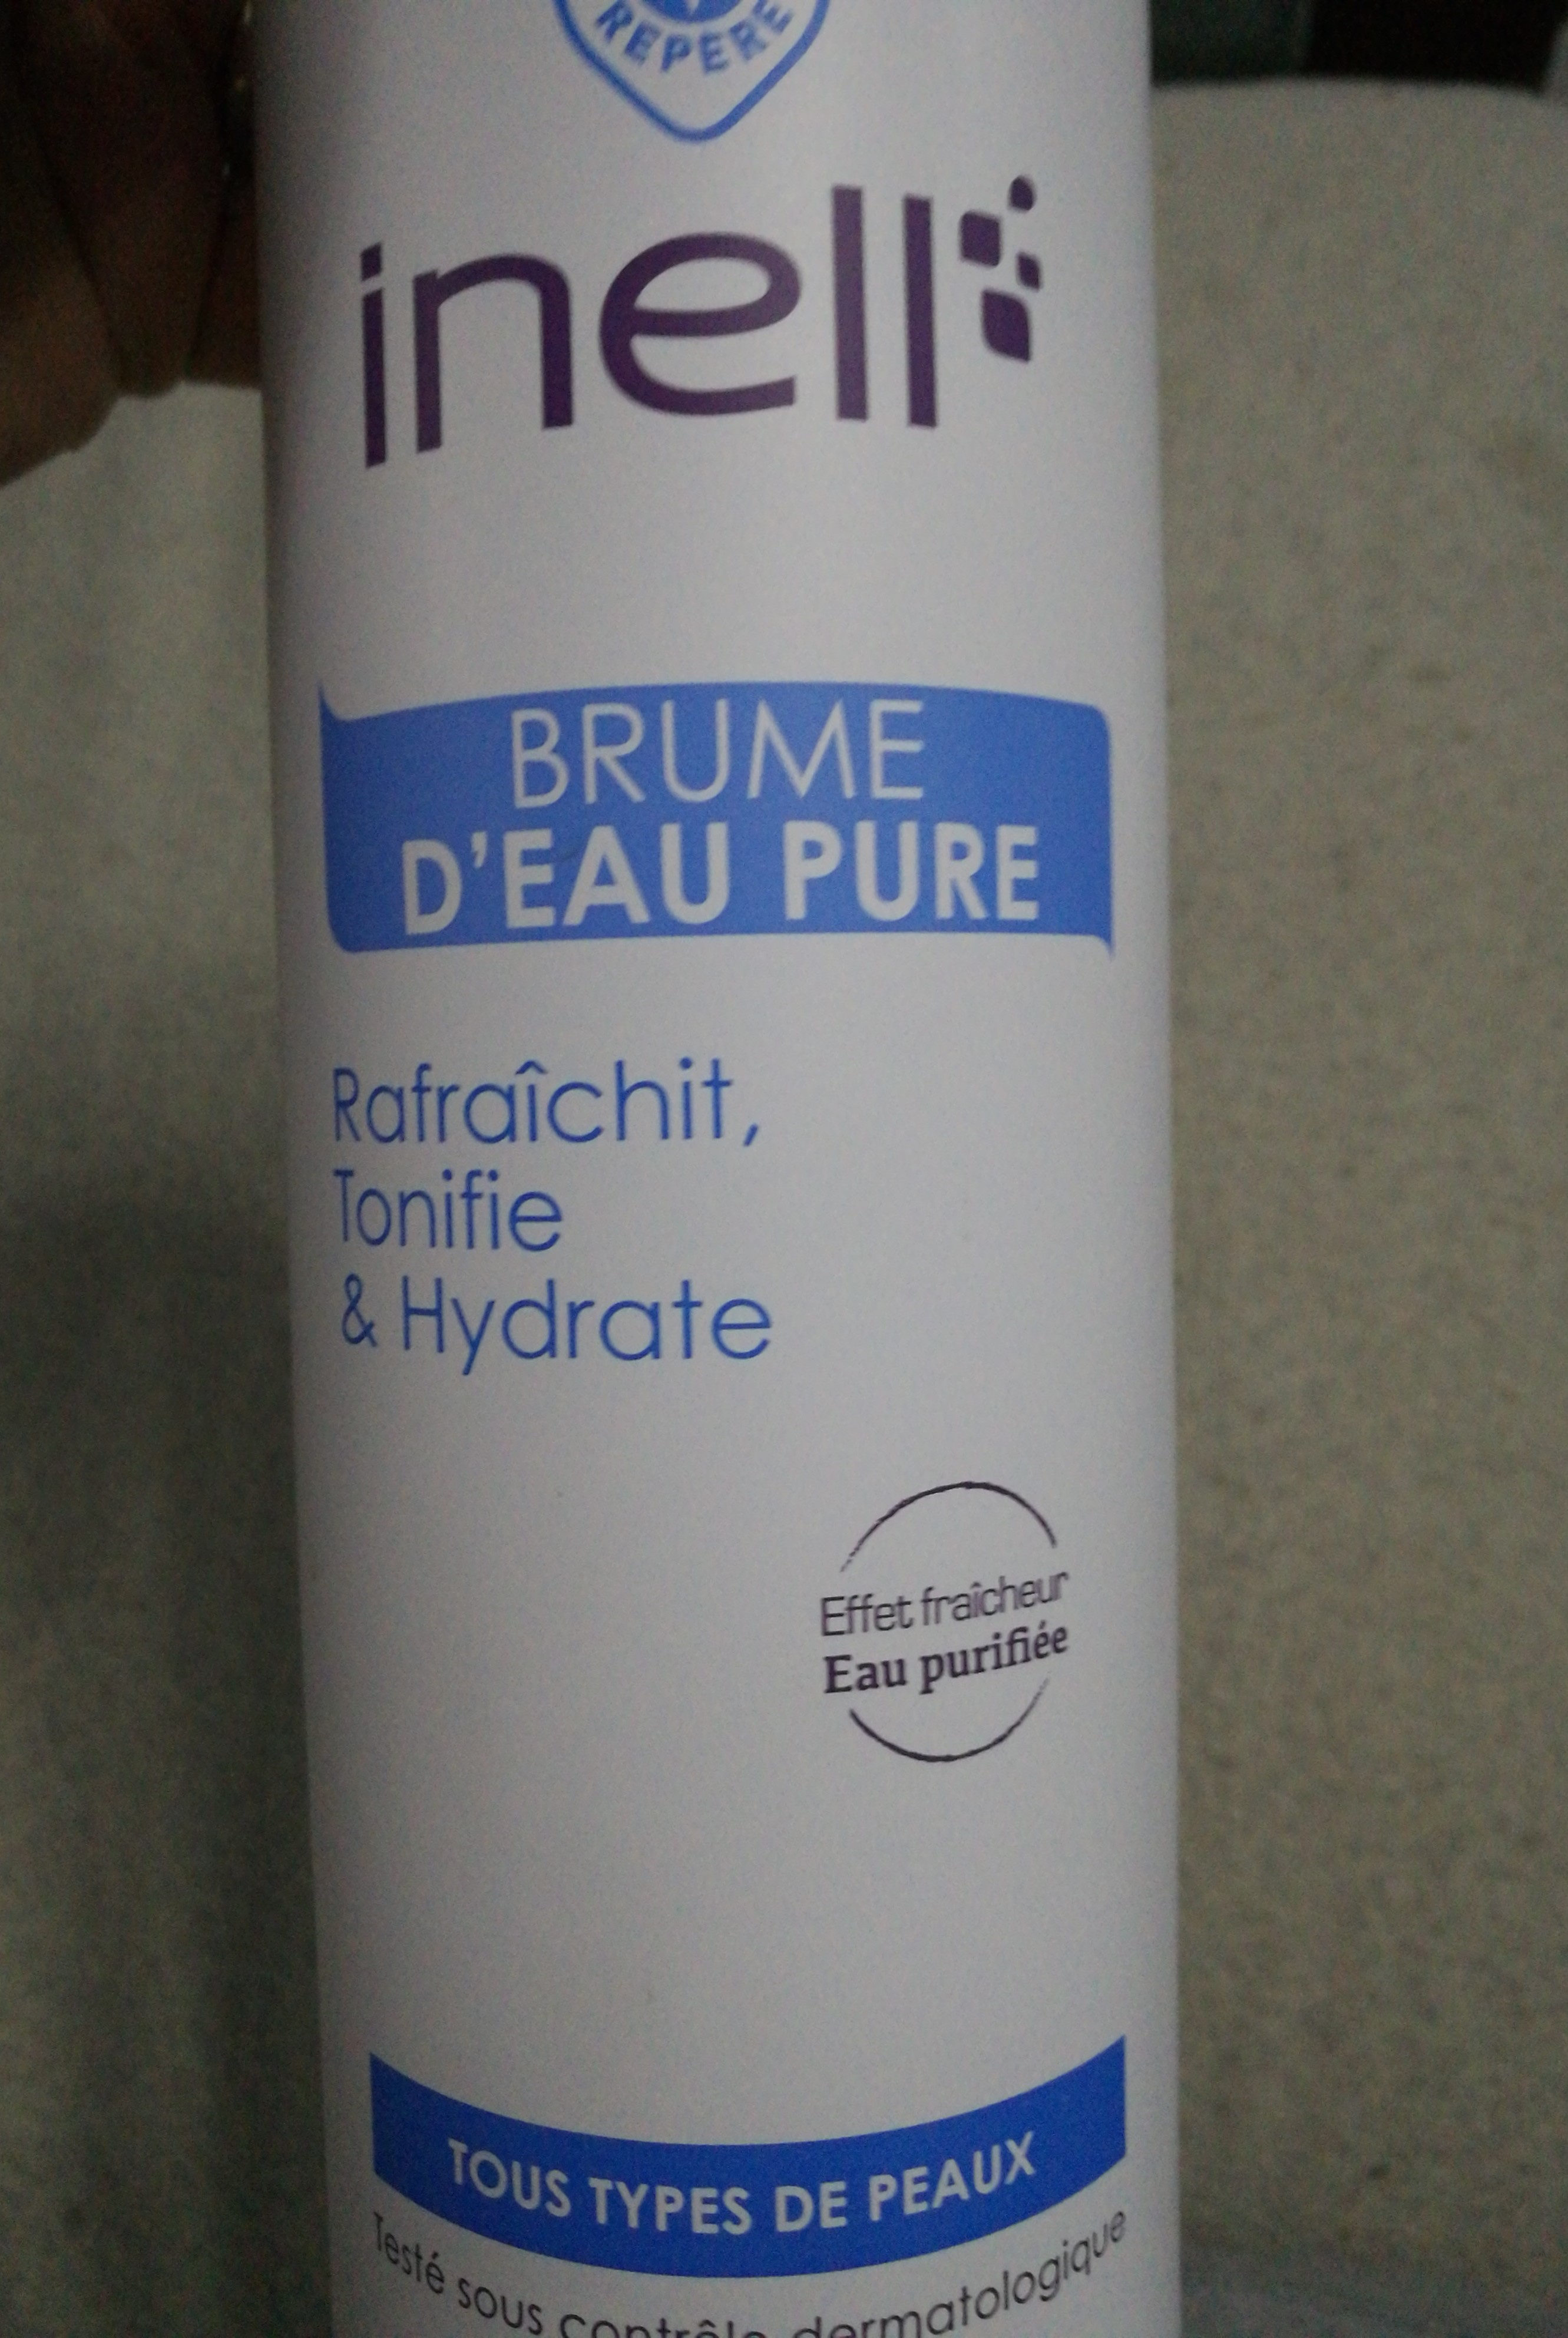 Brume d aeau pure - Product - fr